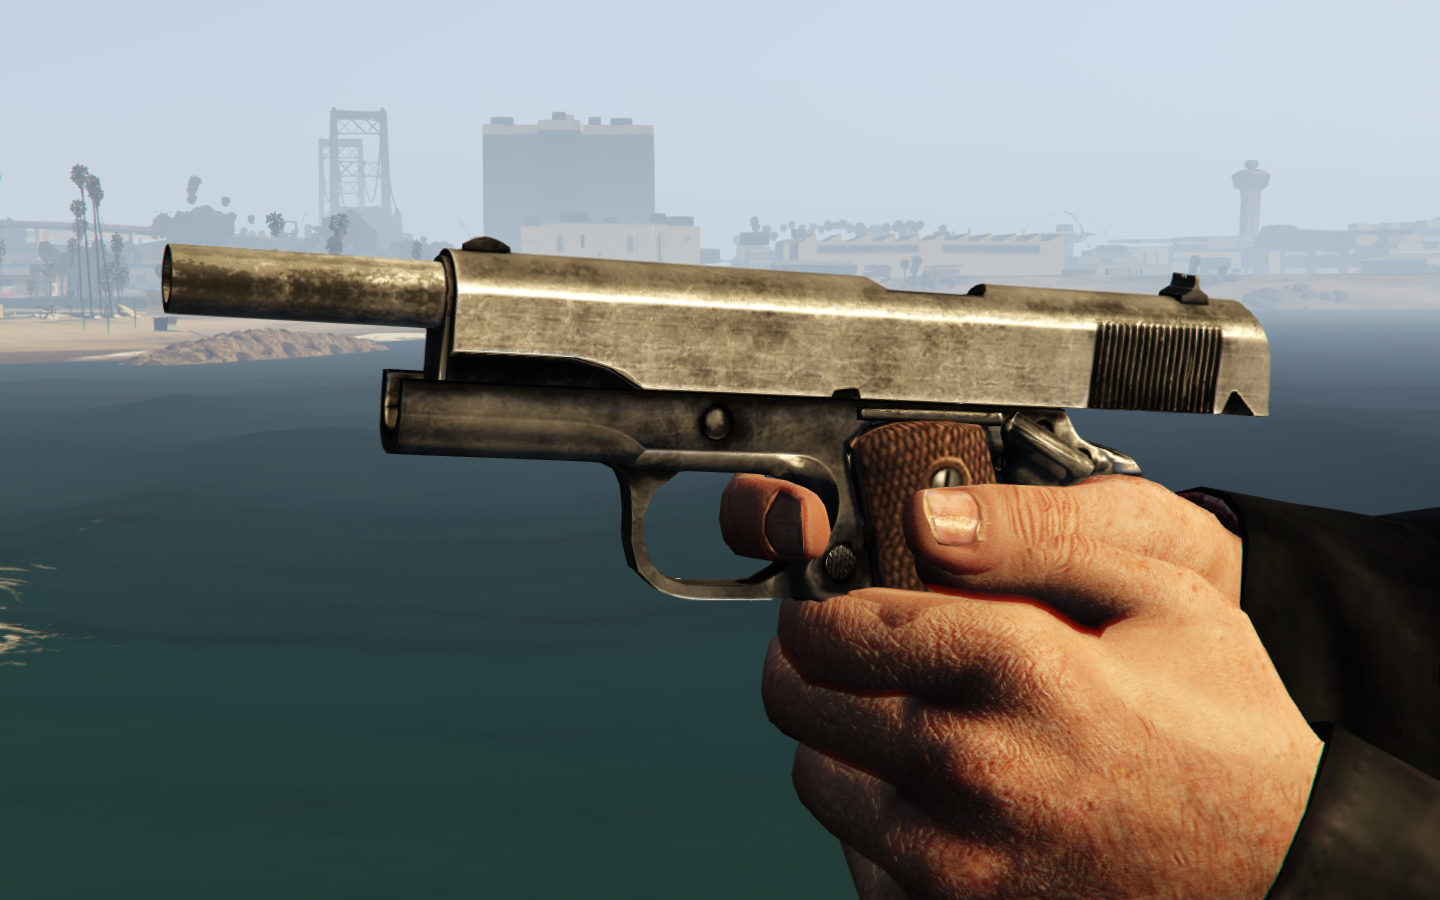 All about that gta 5 launcher фото 99